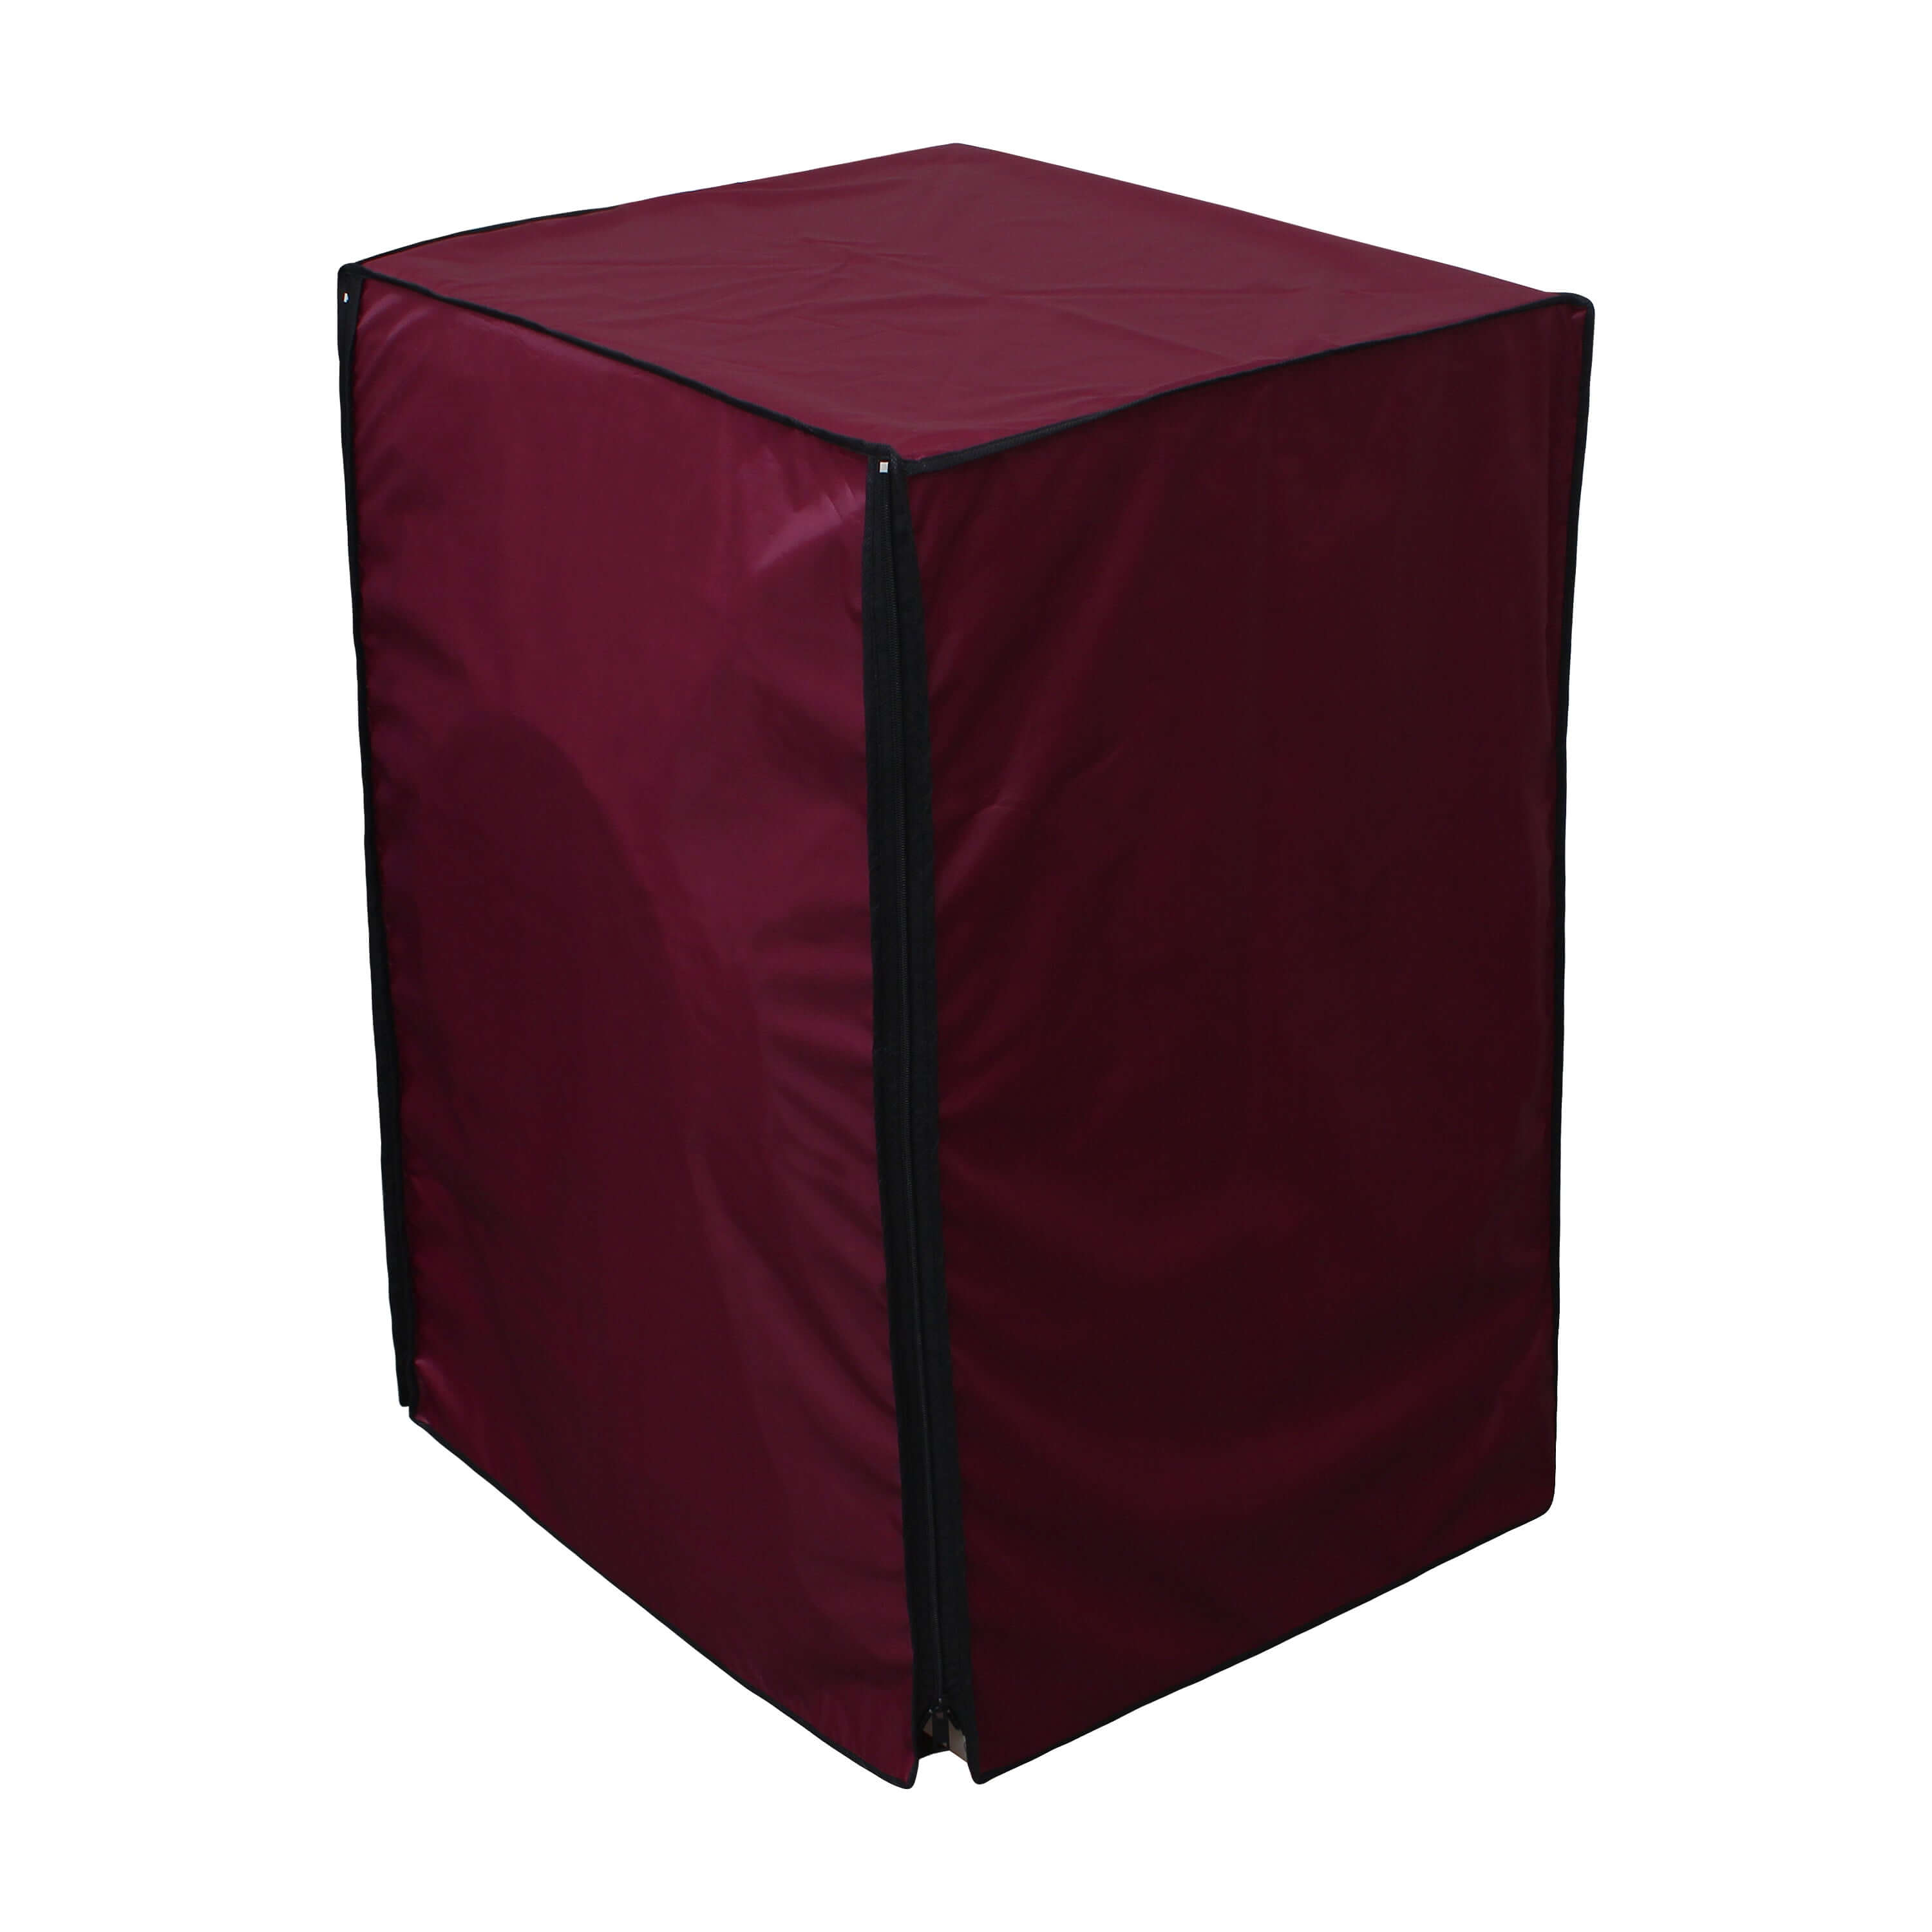 Fully Automatic Front Load Washing Machine Cover, Maroon